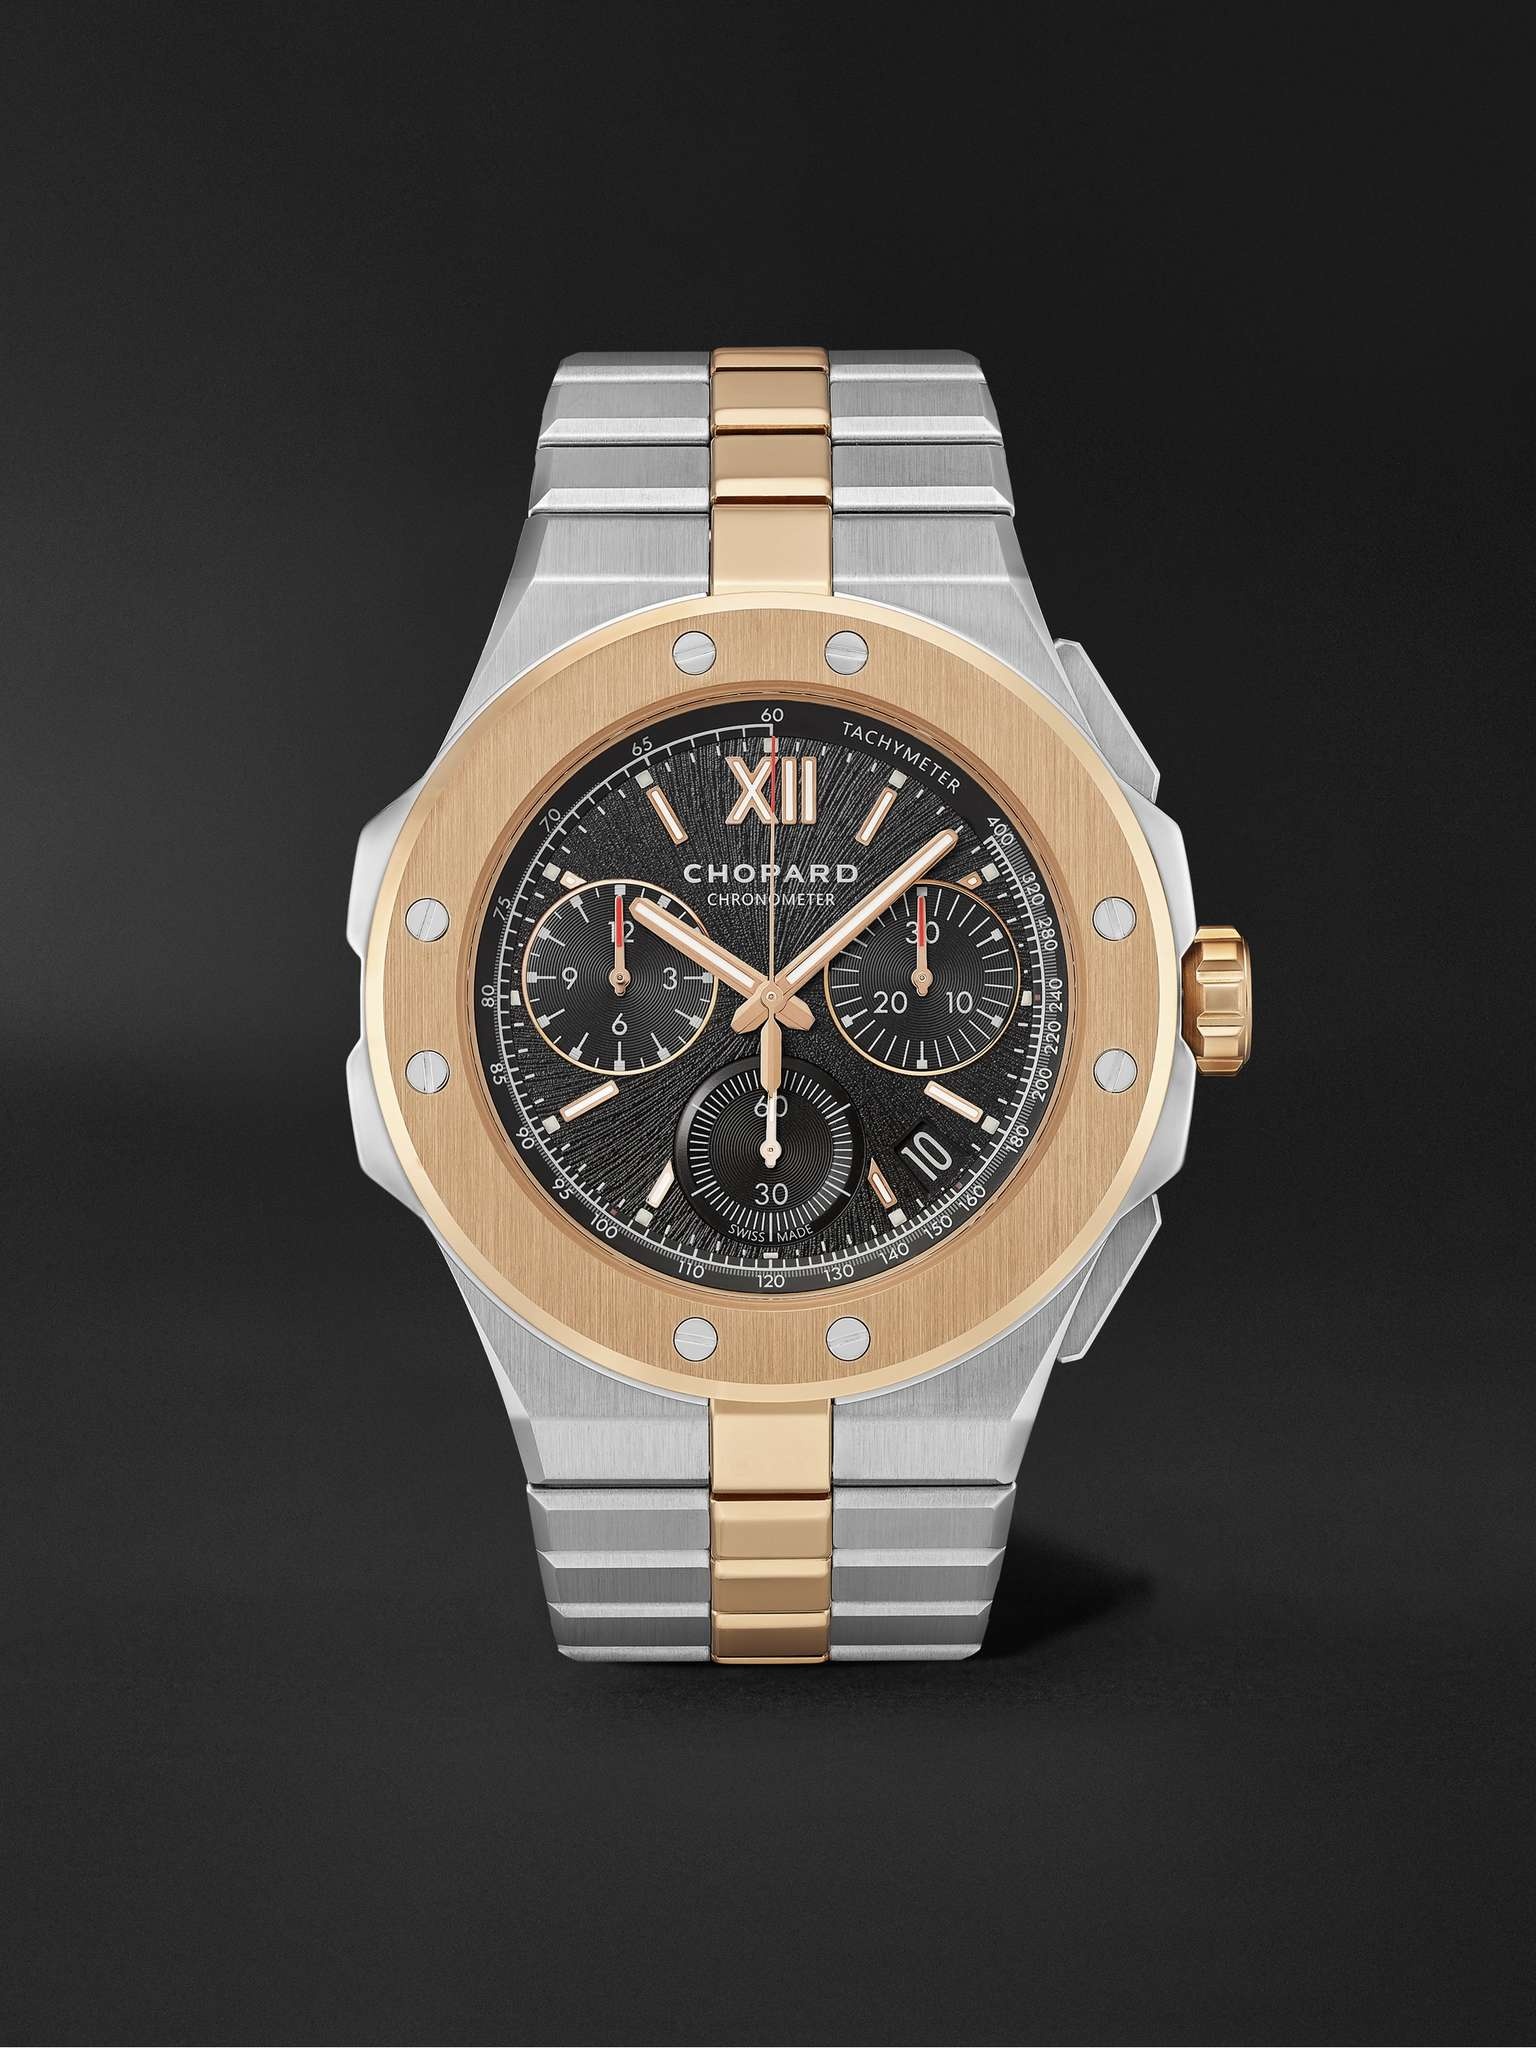 Alpine Eagle XL Chrono Automatic 44mm Lucent Steel and 18-Karat Rose Gold Watch, Ref. No. 298609-600 - 1